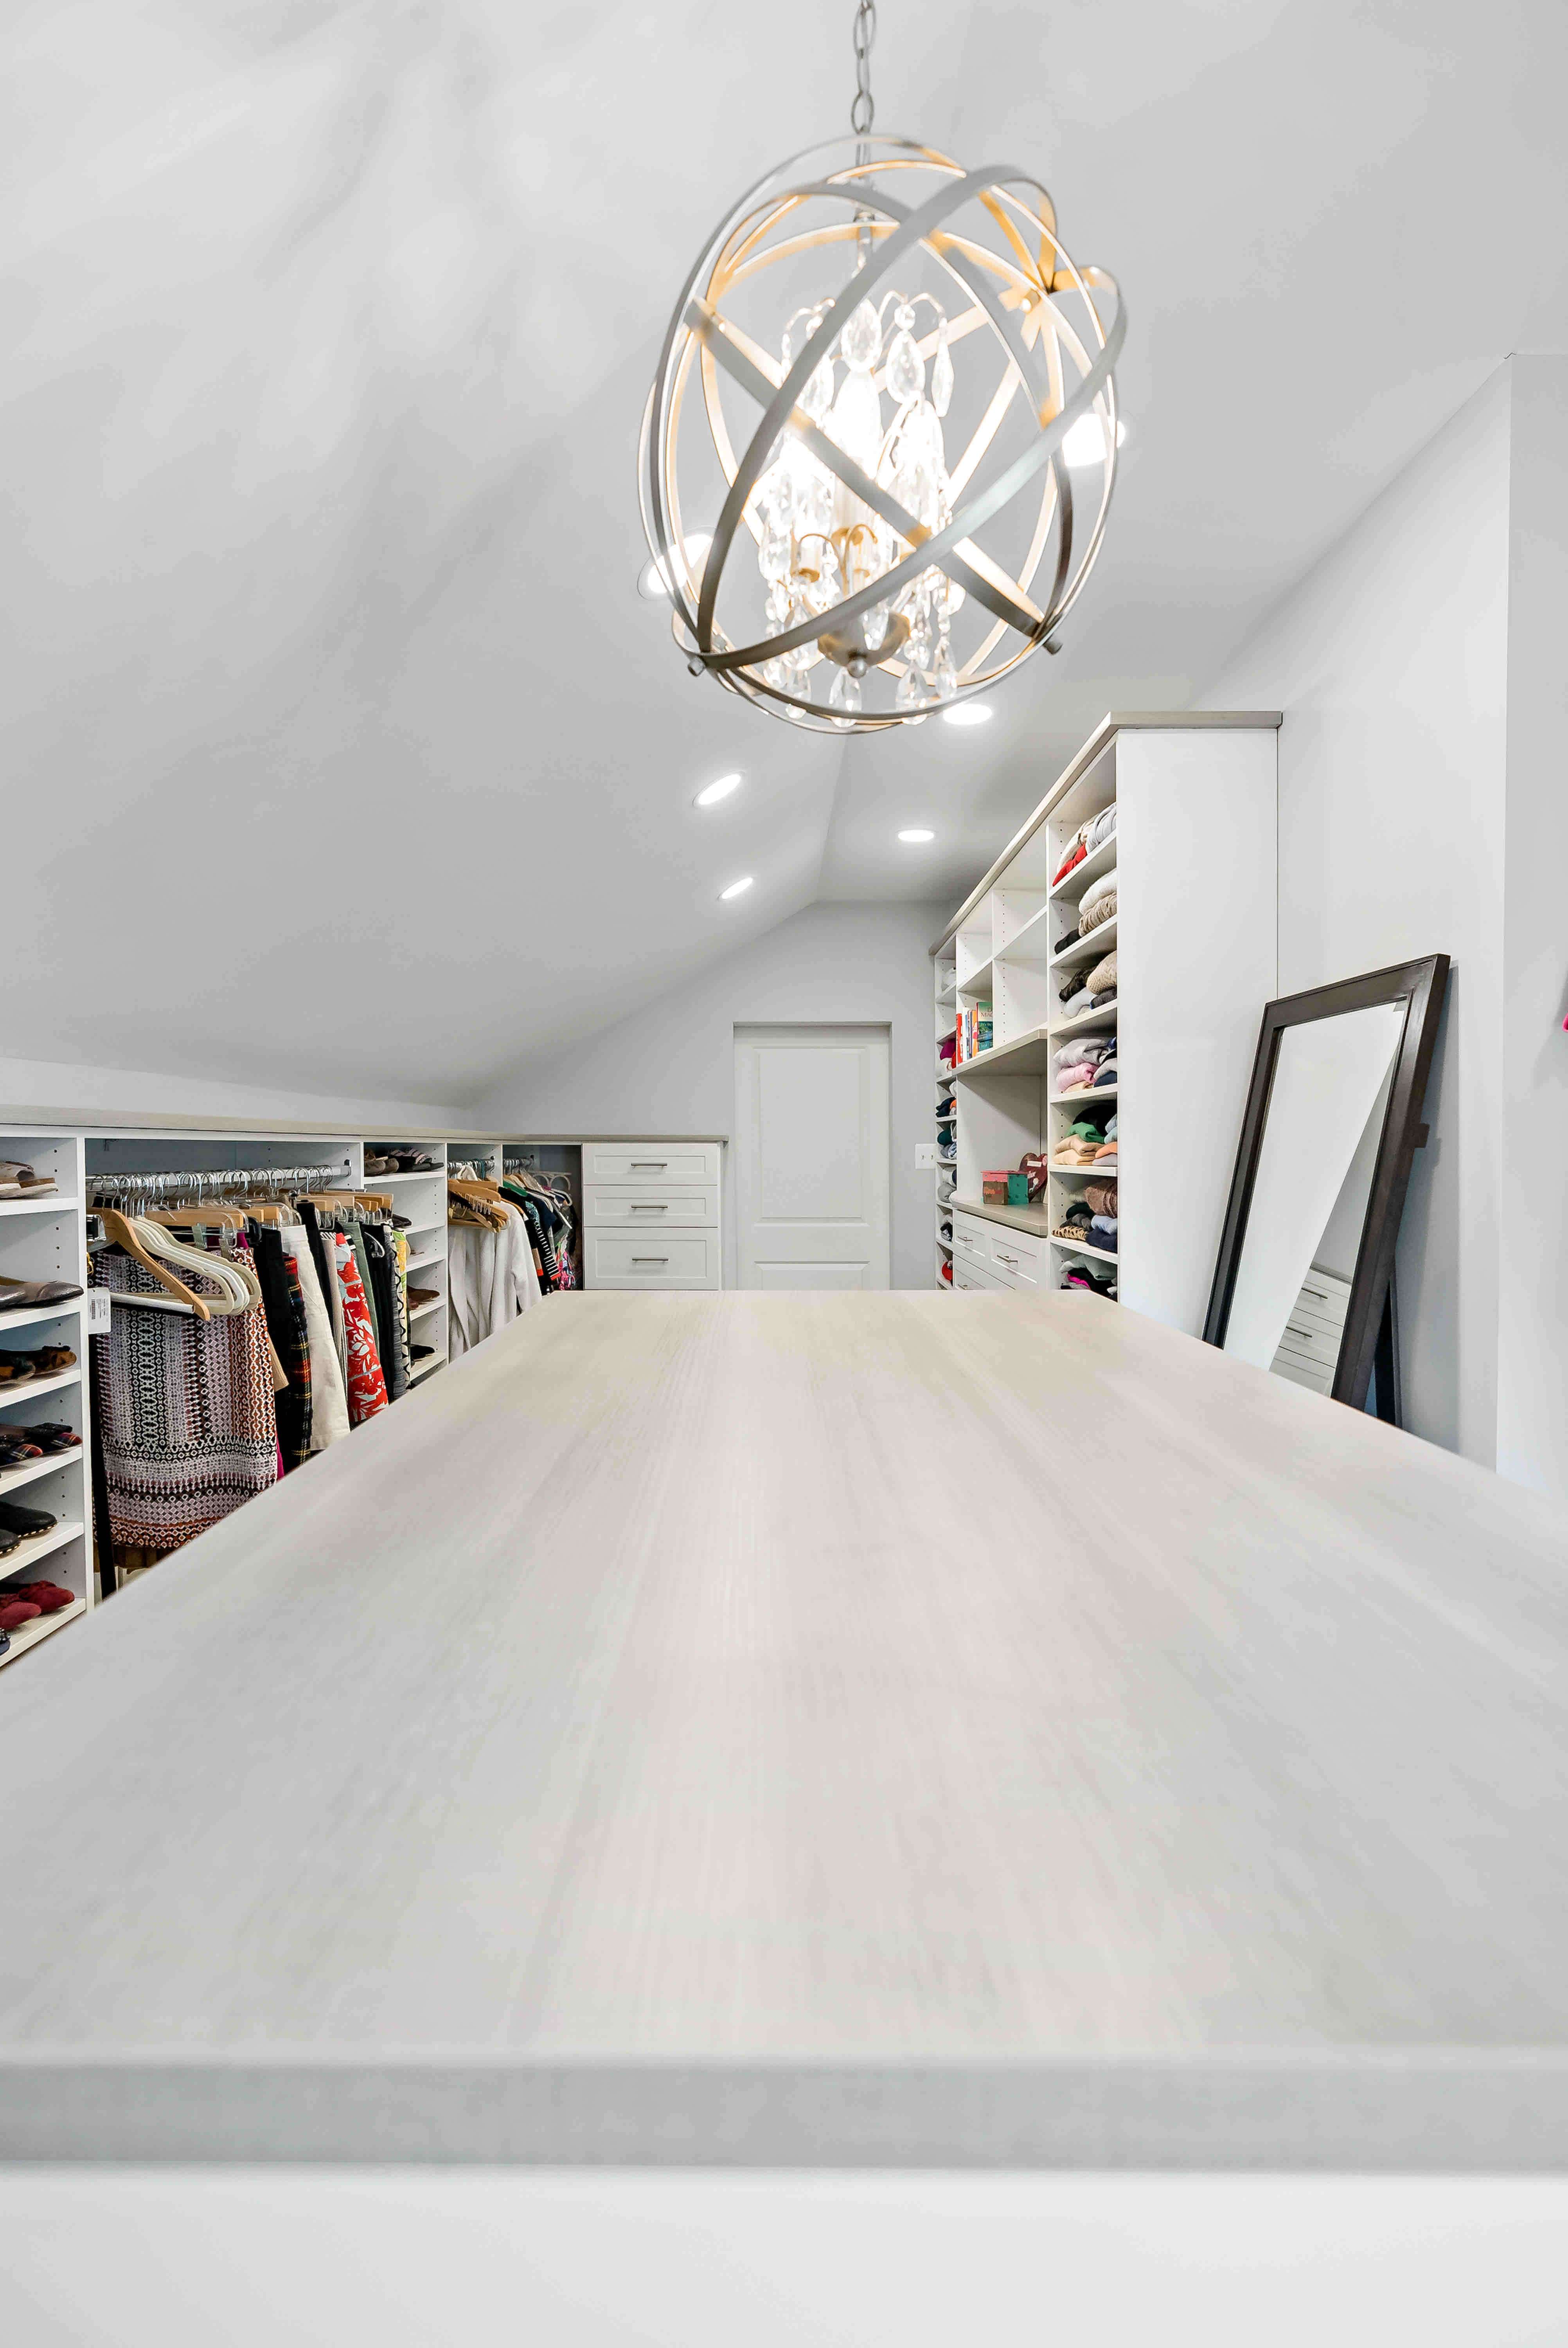 Round chandelier with slanted ceiling in closet